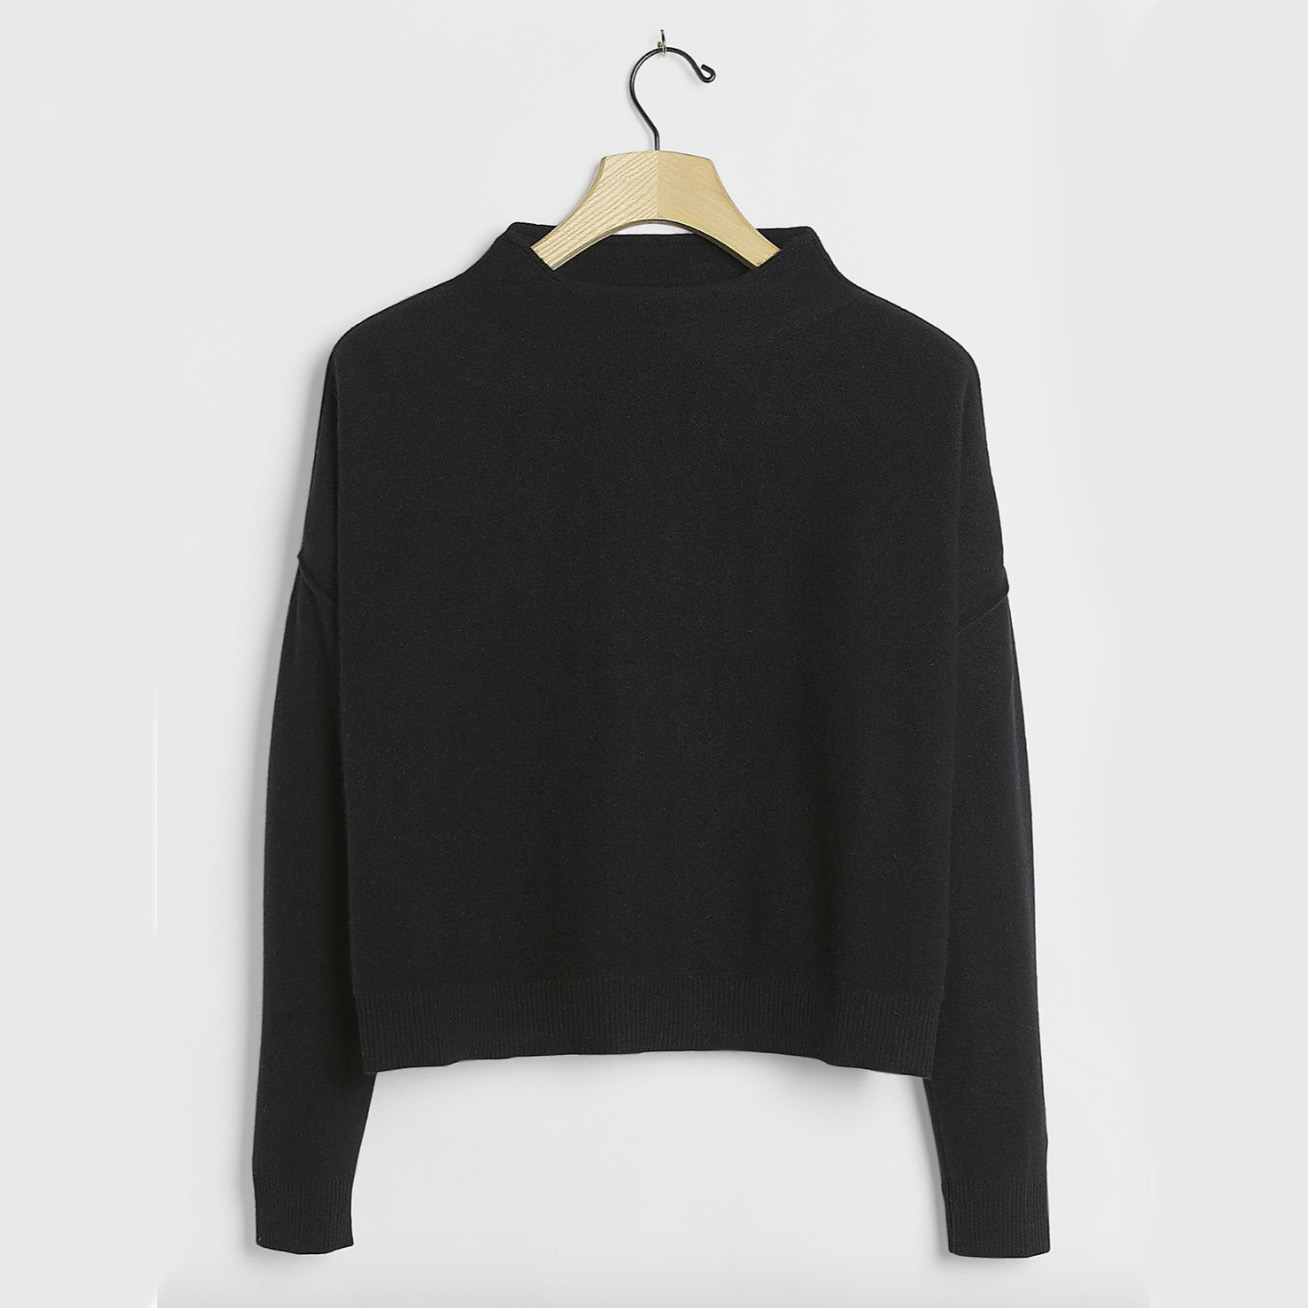 Why Is Cashmere Expensive? - Best Cashmere Sweaters | HelloGiggles